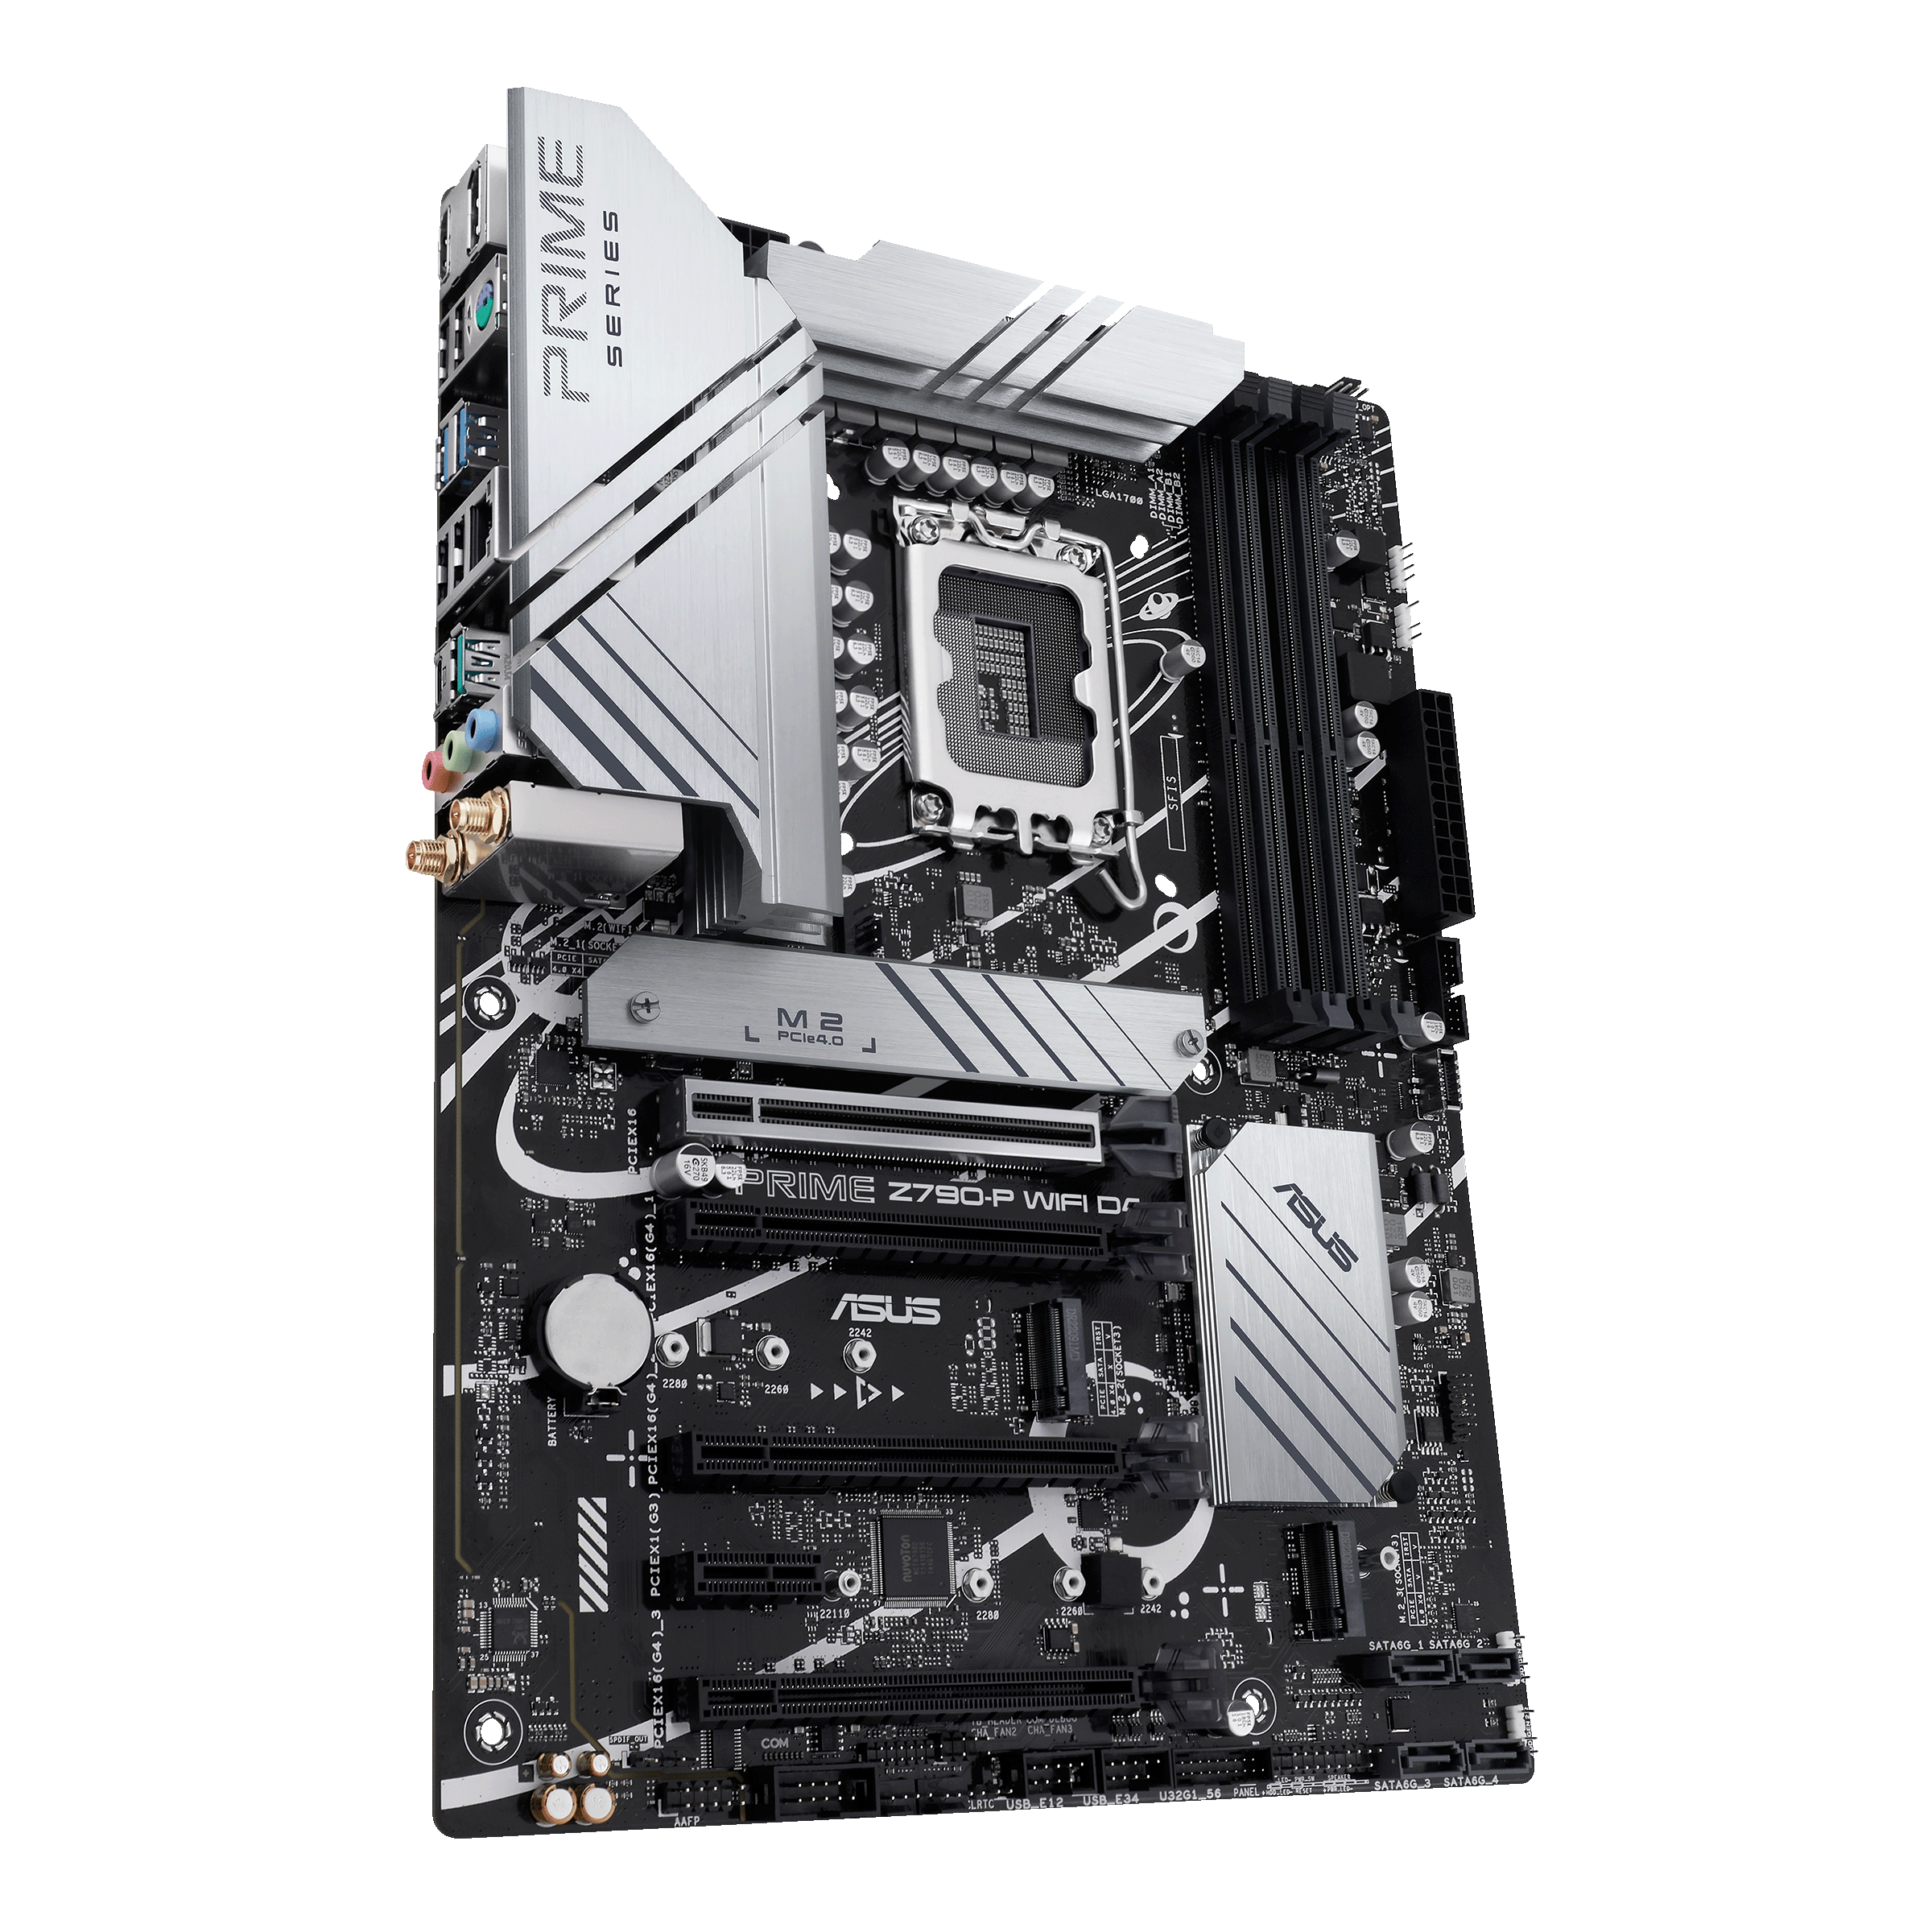 The PRIME Z790-P WIFI D4 motherboard features Aura Sync. 